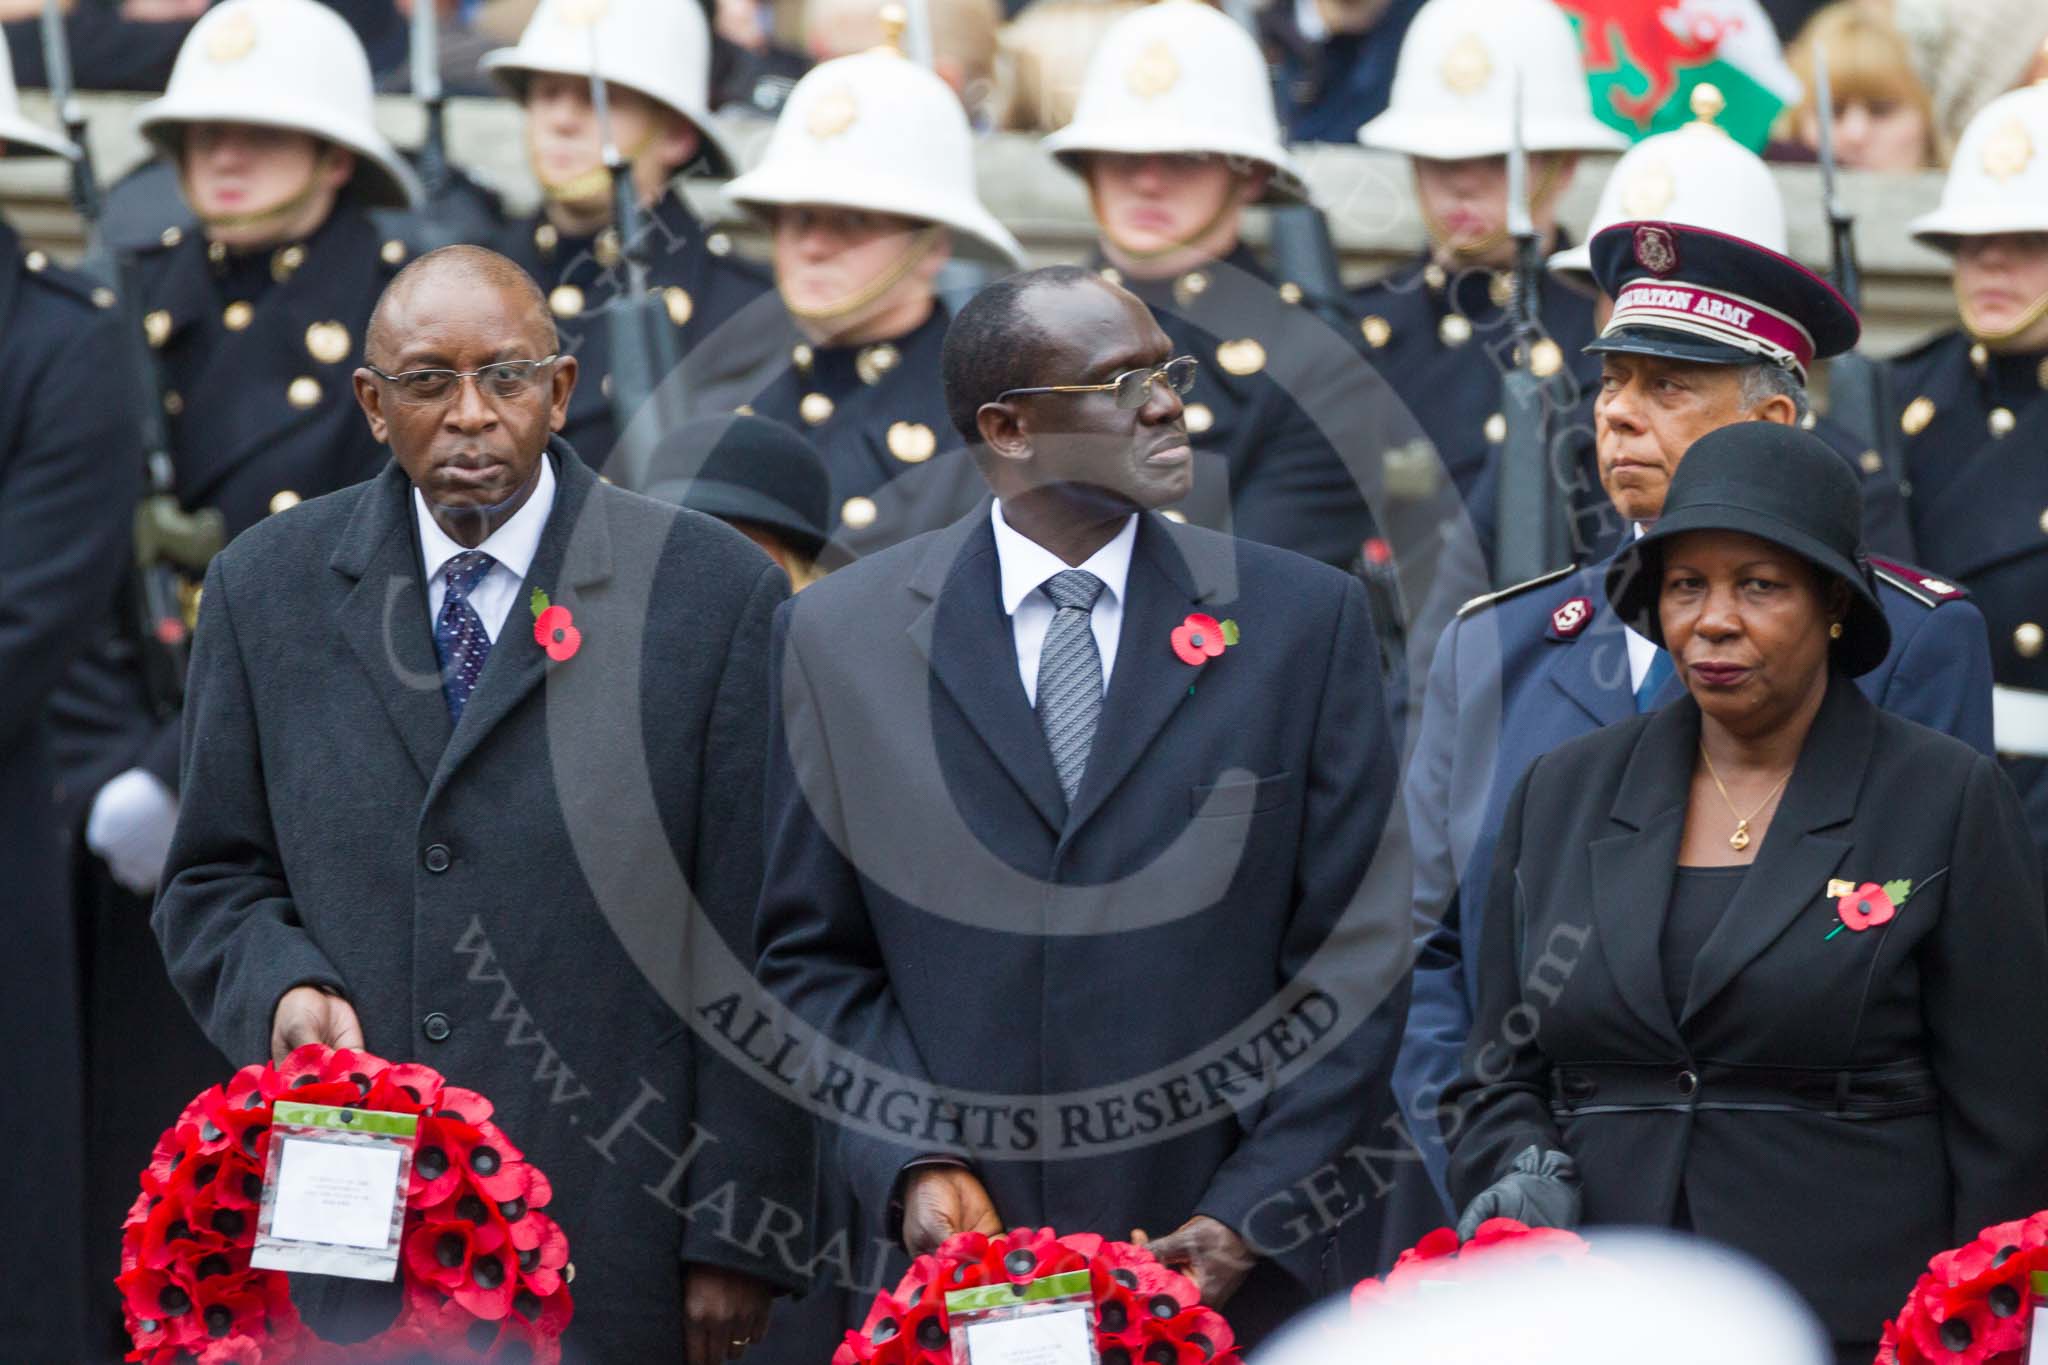 Remembrance Sunday at the Cenotaph 2015: The High Commissioner of Malawi, the High Commissioner of  Kenya, the High Commissioner of Uganda with their wreaths at the Cenotaph. Image #113, 08 November 2015 10:57 Whitehall, London, UK